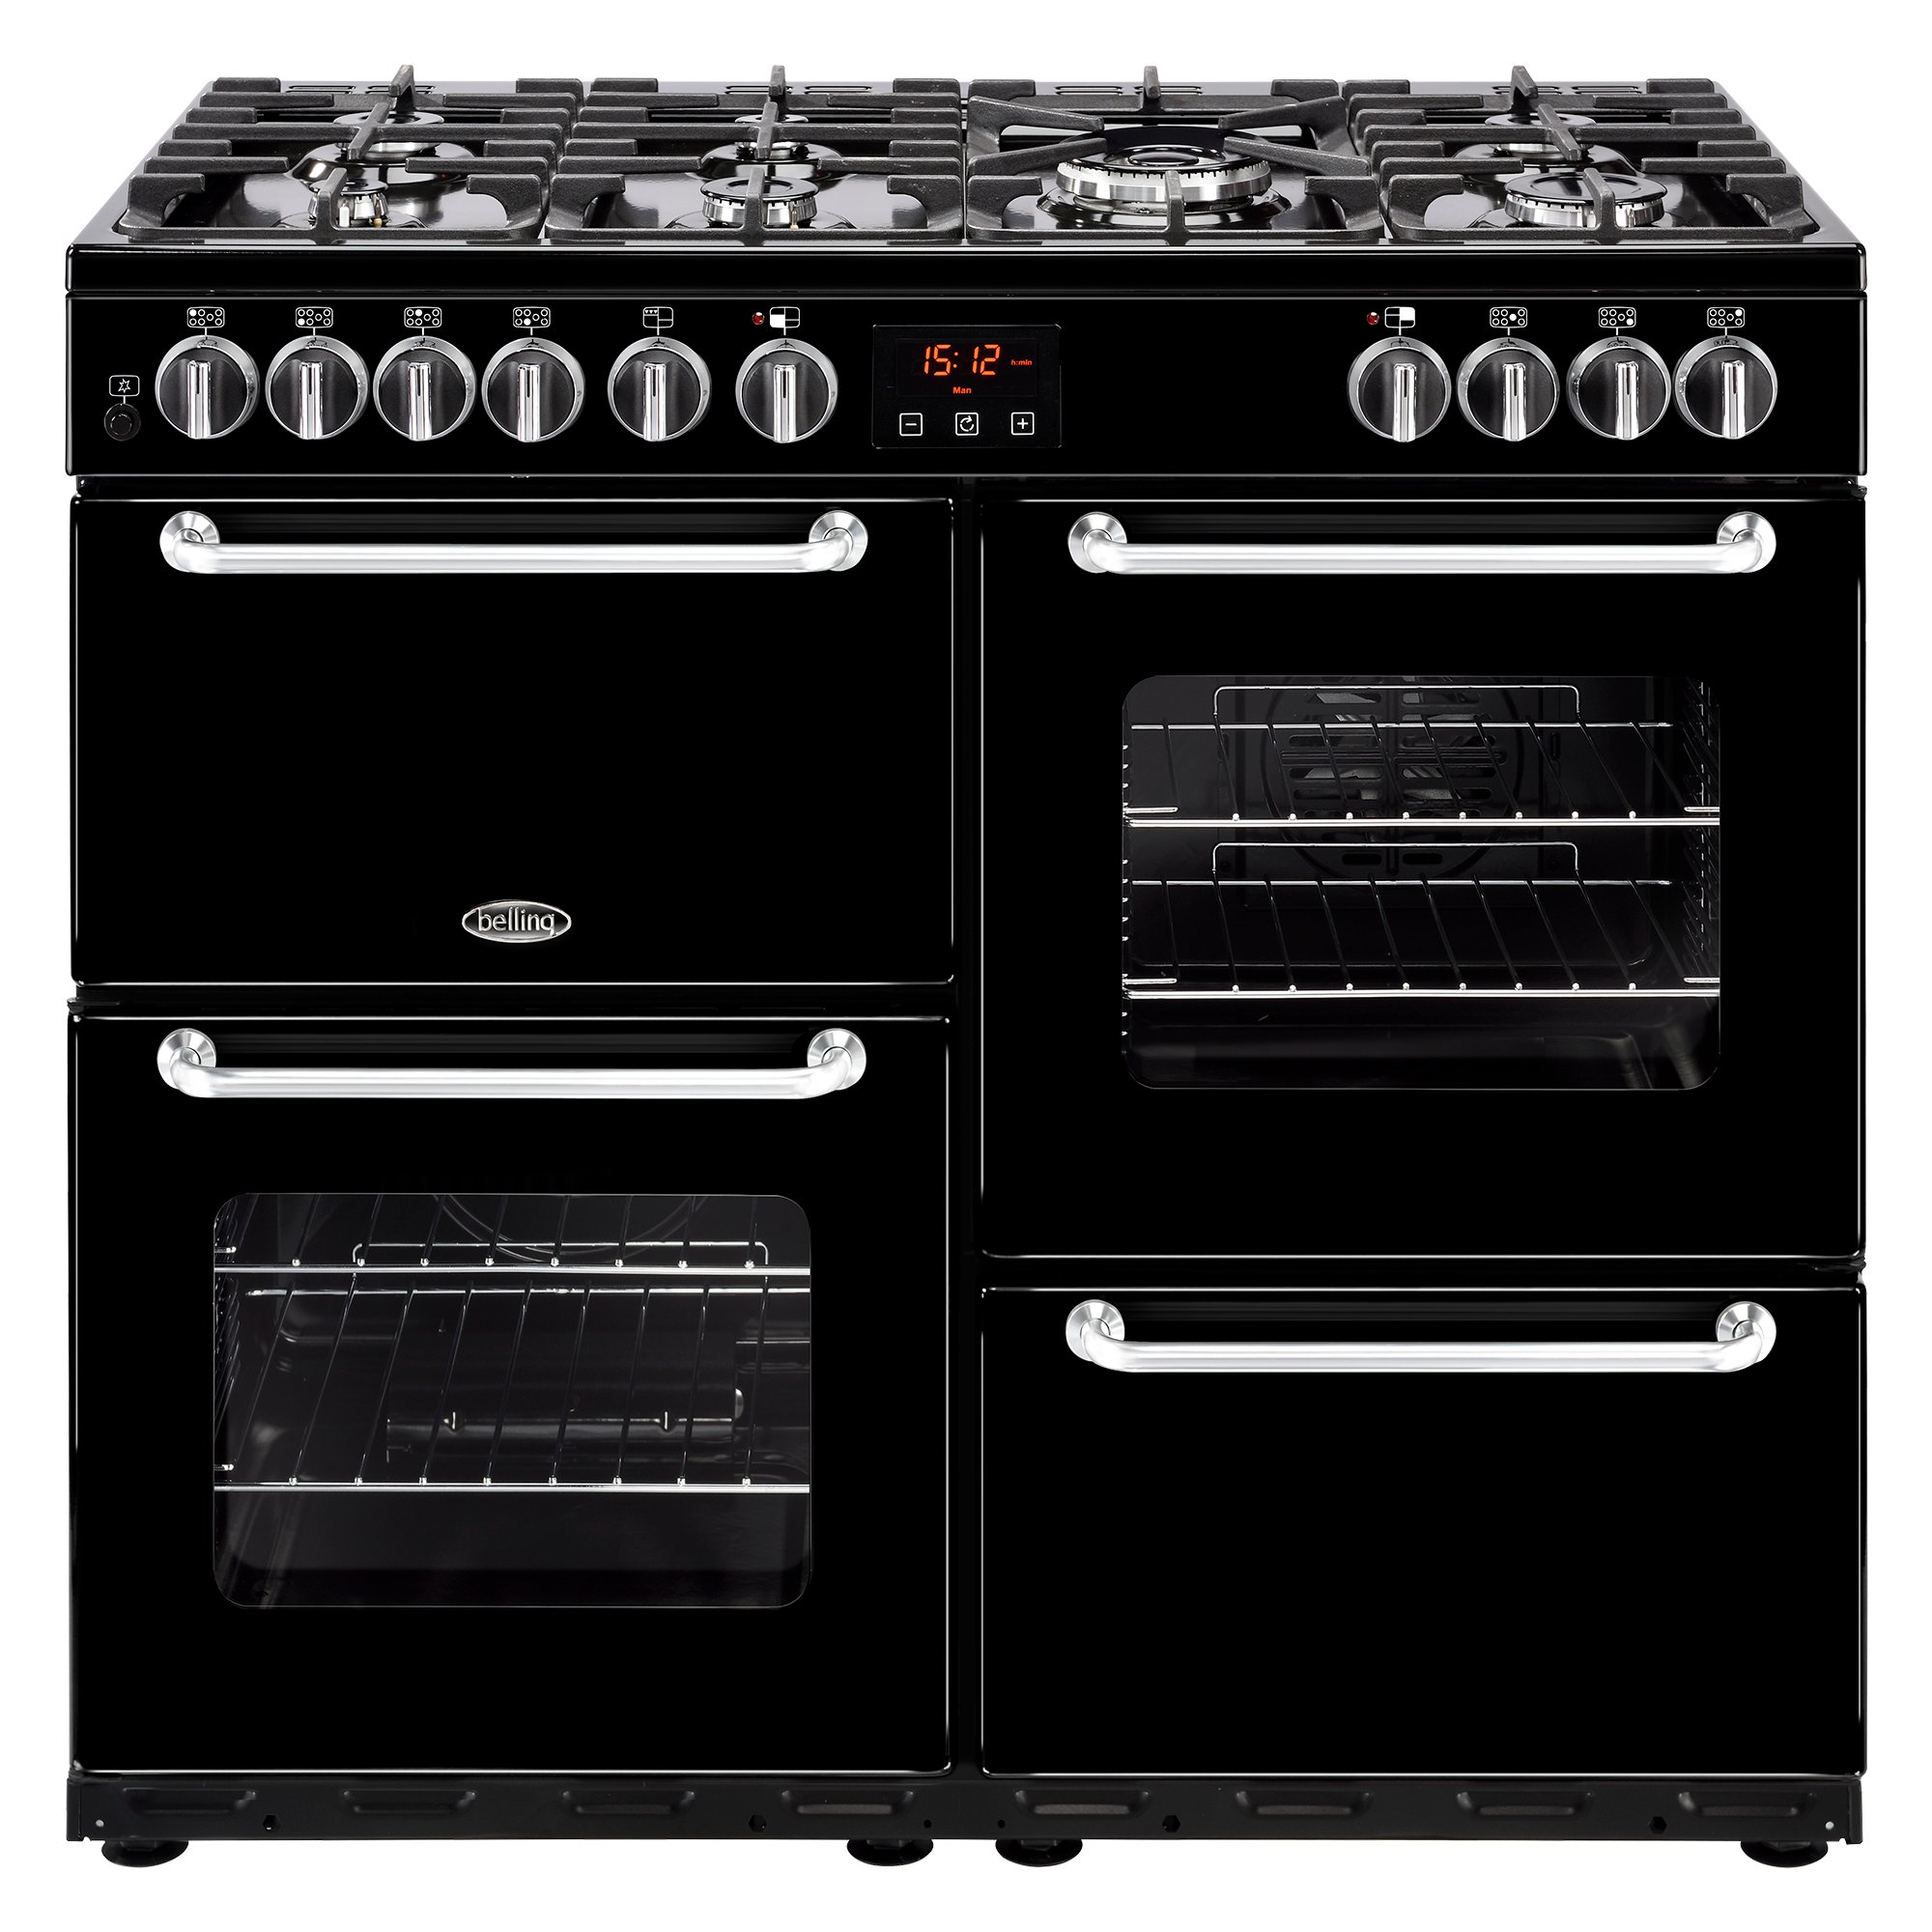 100cm dual fuel range cooker with 7 burner gas hob, variable rate electric grill, fanned main oven and conventional second oven.